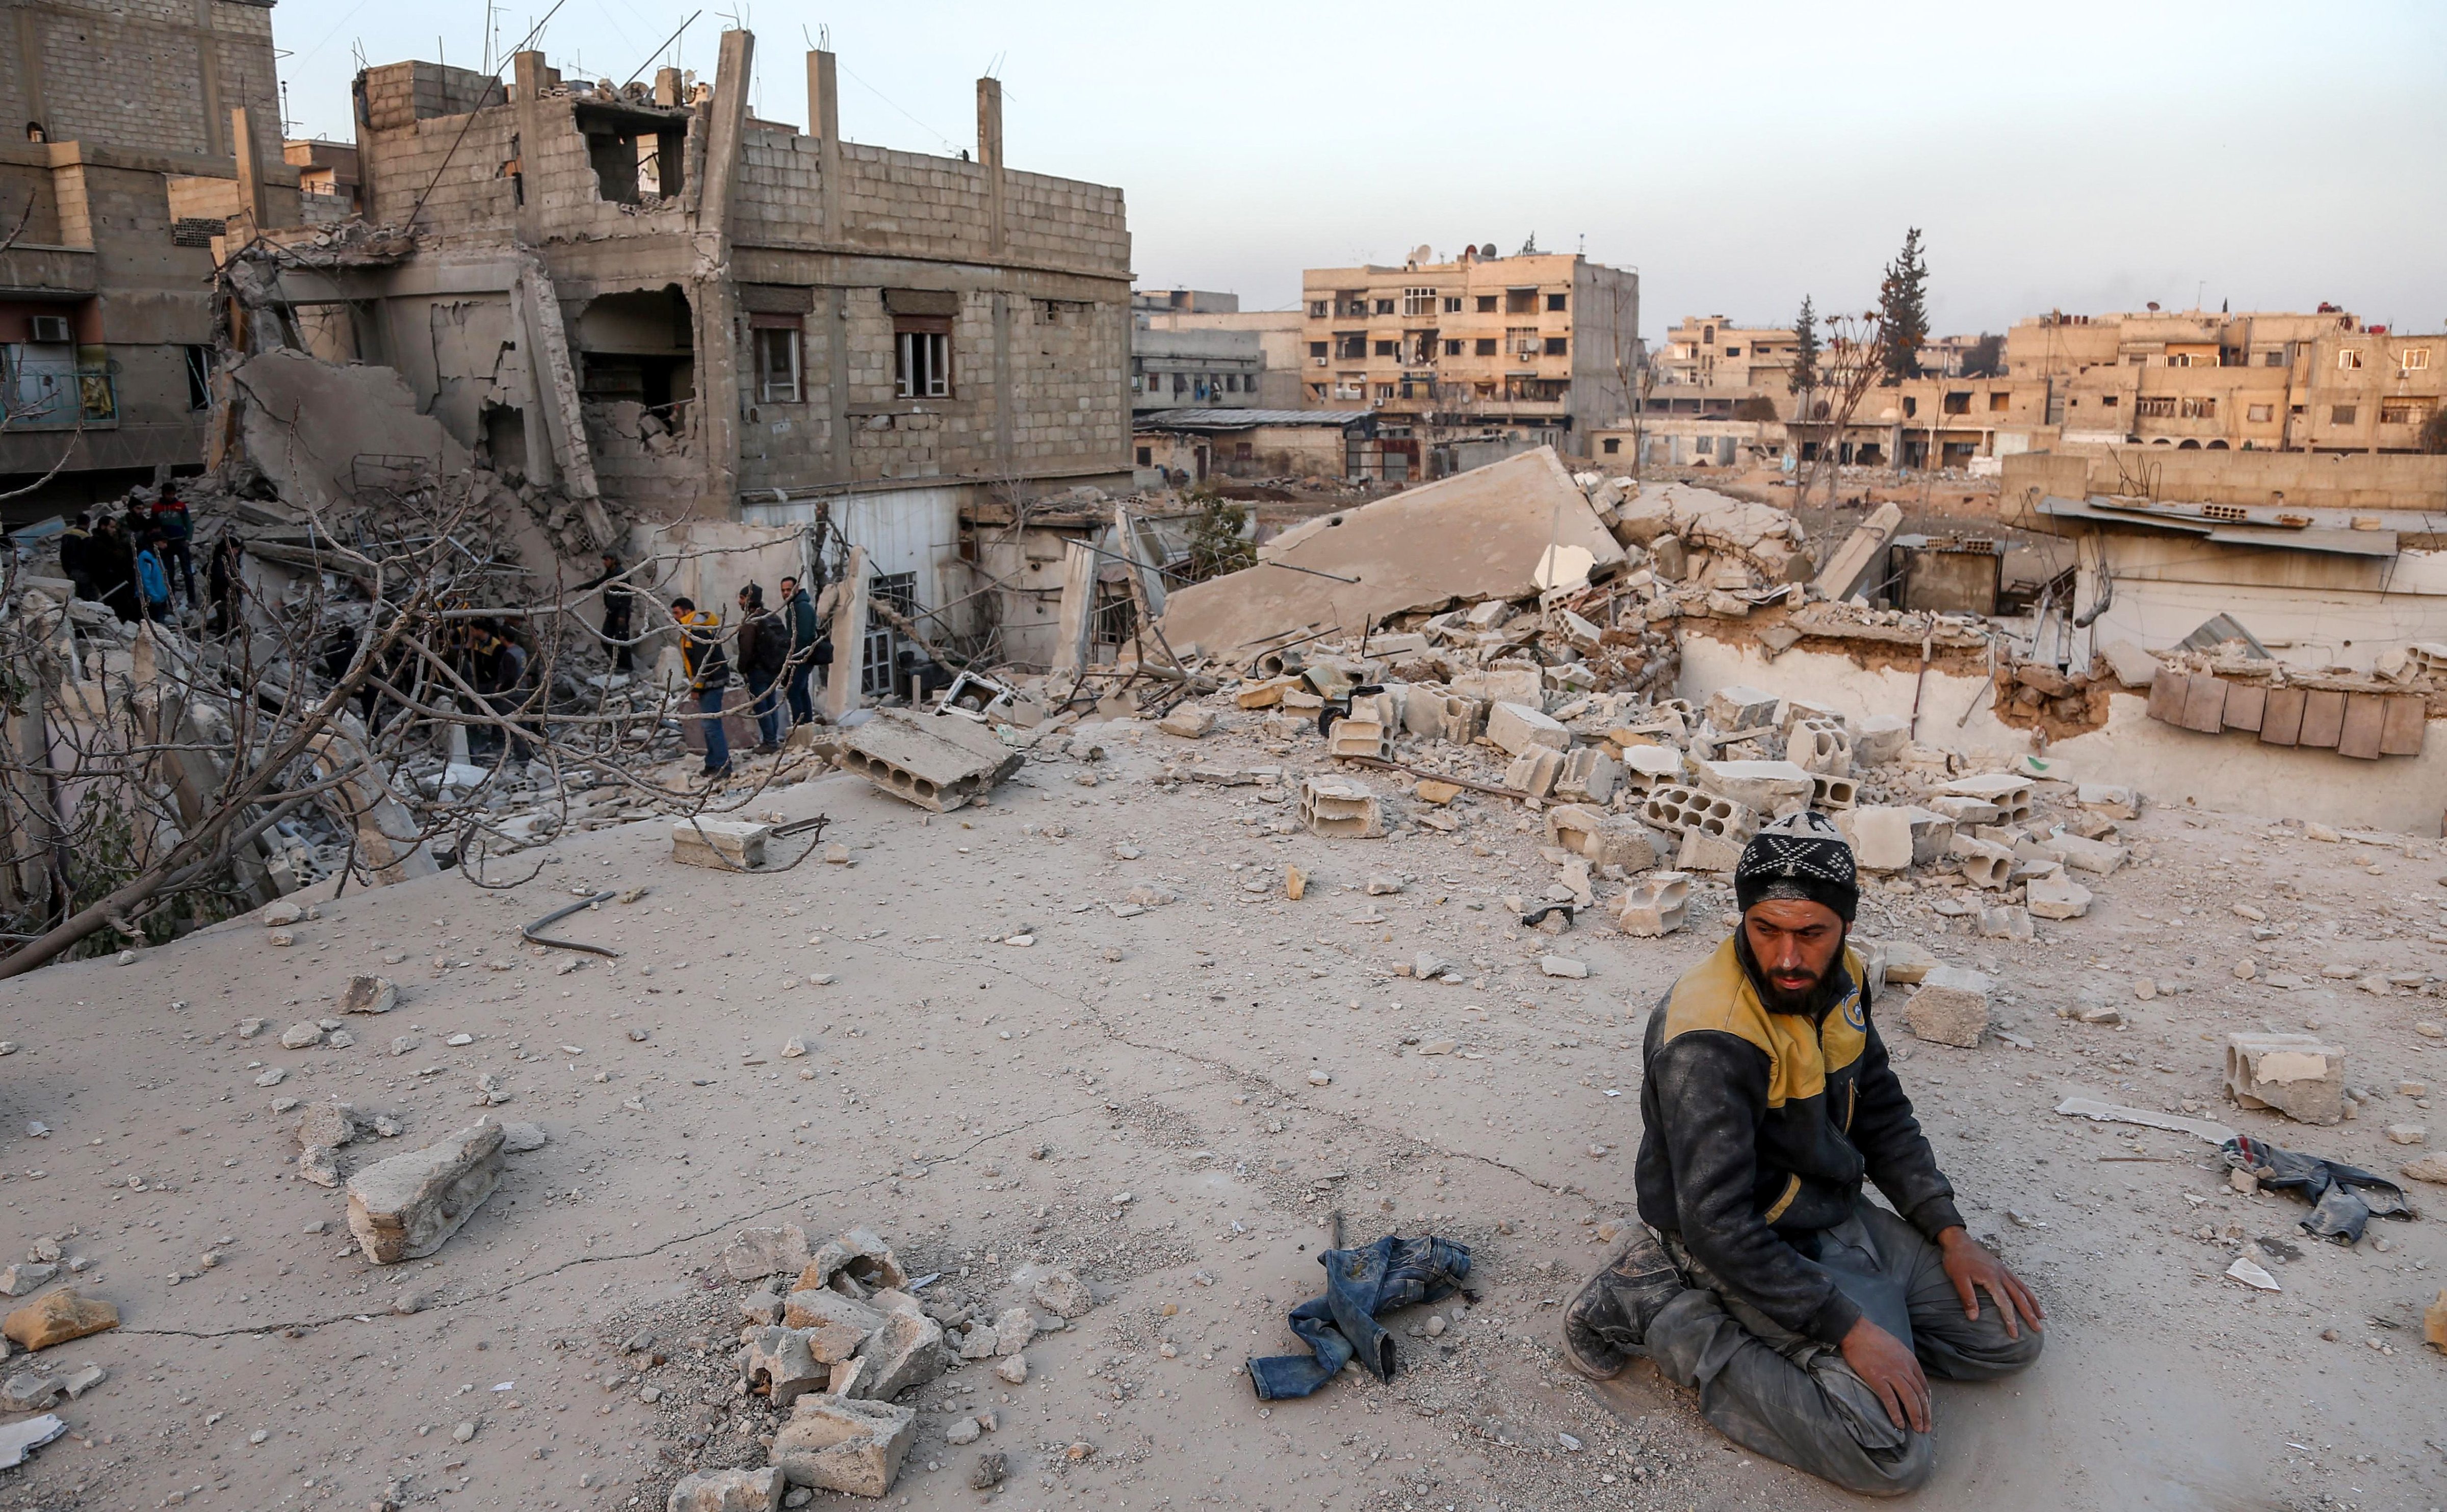 A Syrian civil defense volunteer performs ritual sunset prayers next to the site of a building that collapsed following reported regime air strikes in the rebel-held town of Arbin, in the besieged Eastern Ghouta region on the outskirts of the capital Damascus, on February 6, 2018. (ABDULMONAM EASSA—AFP/Getty Images)